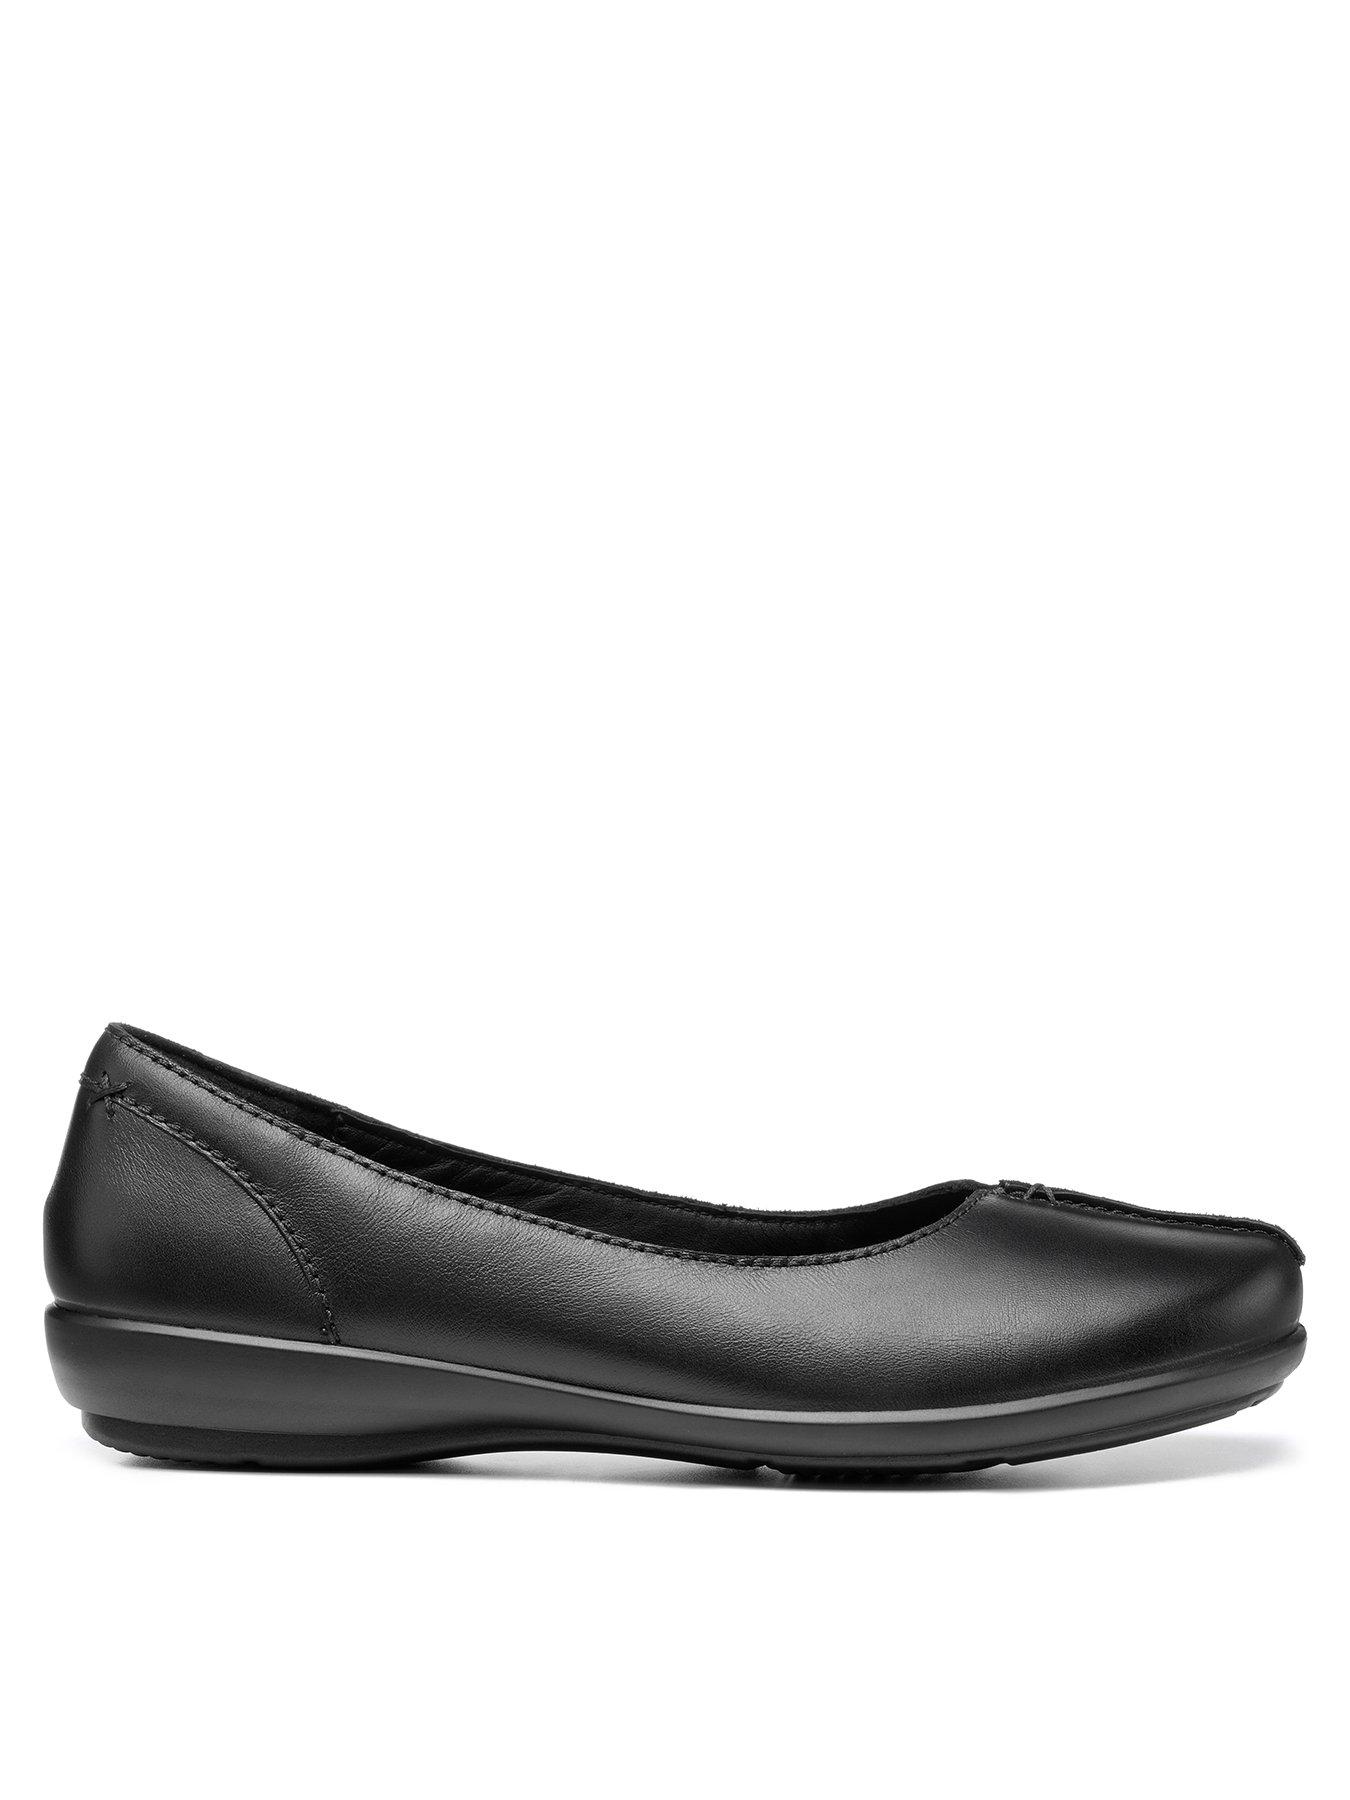 littlewoods wide fit shoes